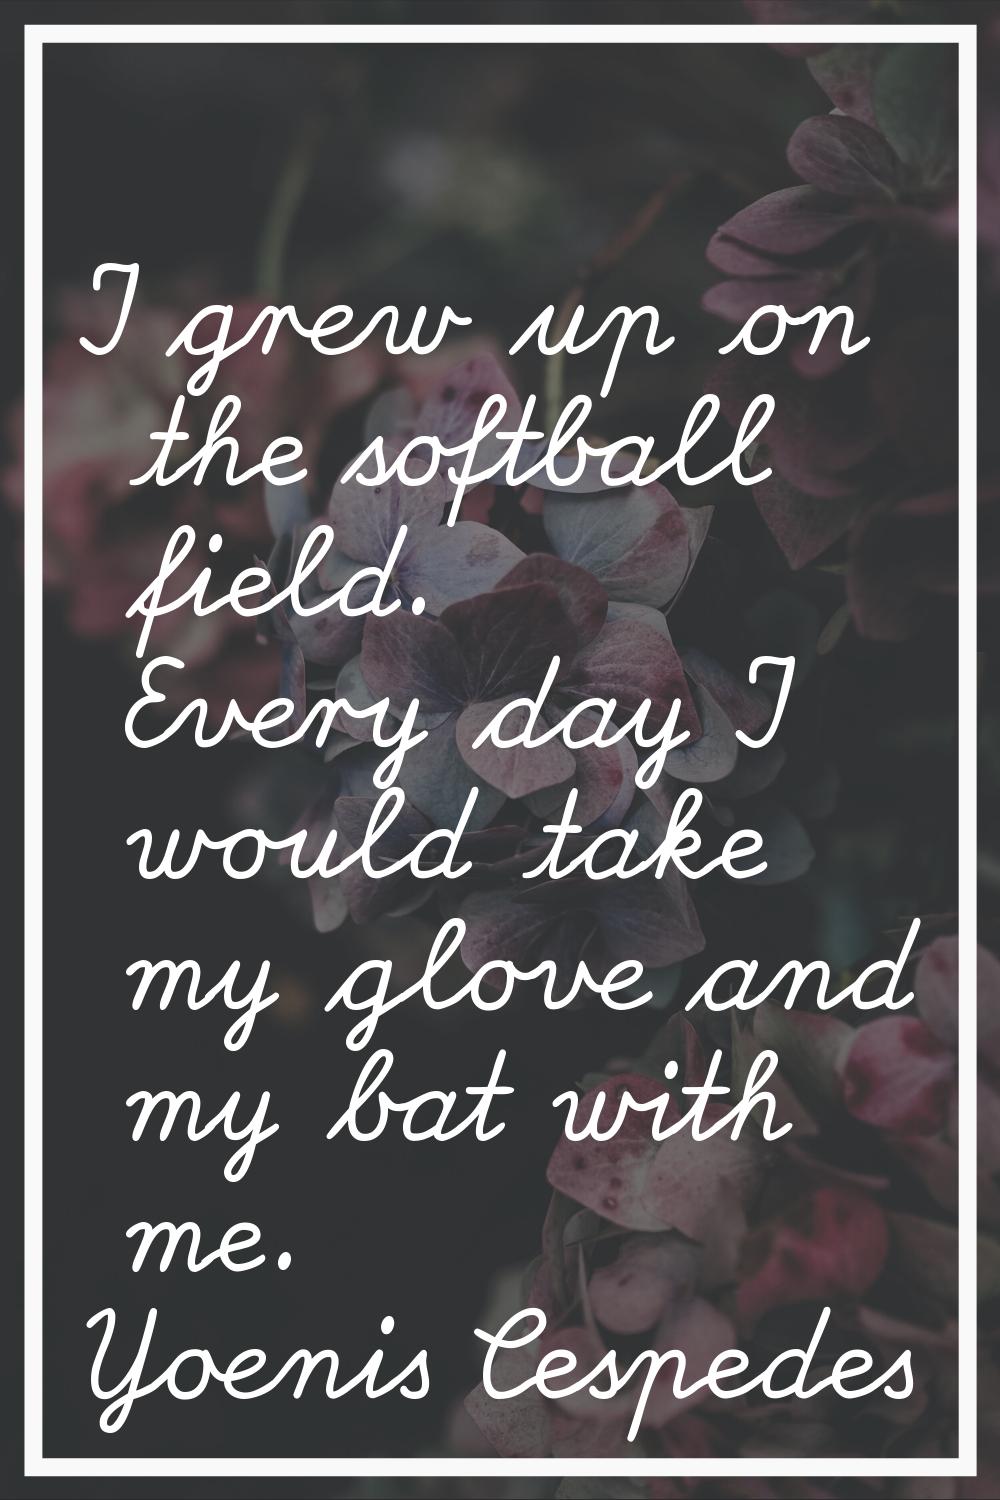 I grew up on the softball field. Every day I would take my glove and my bat with me.